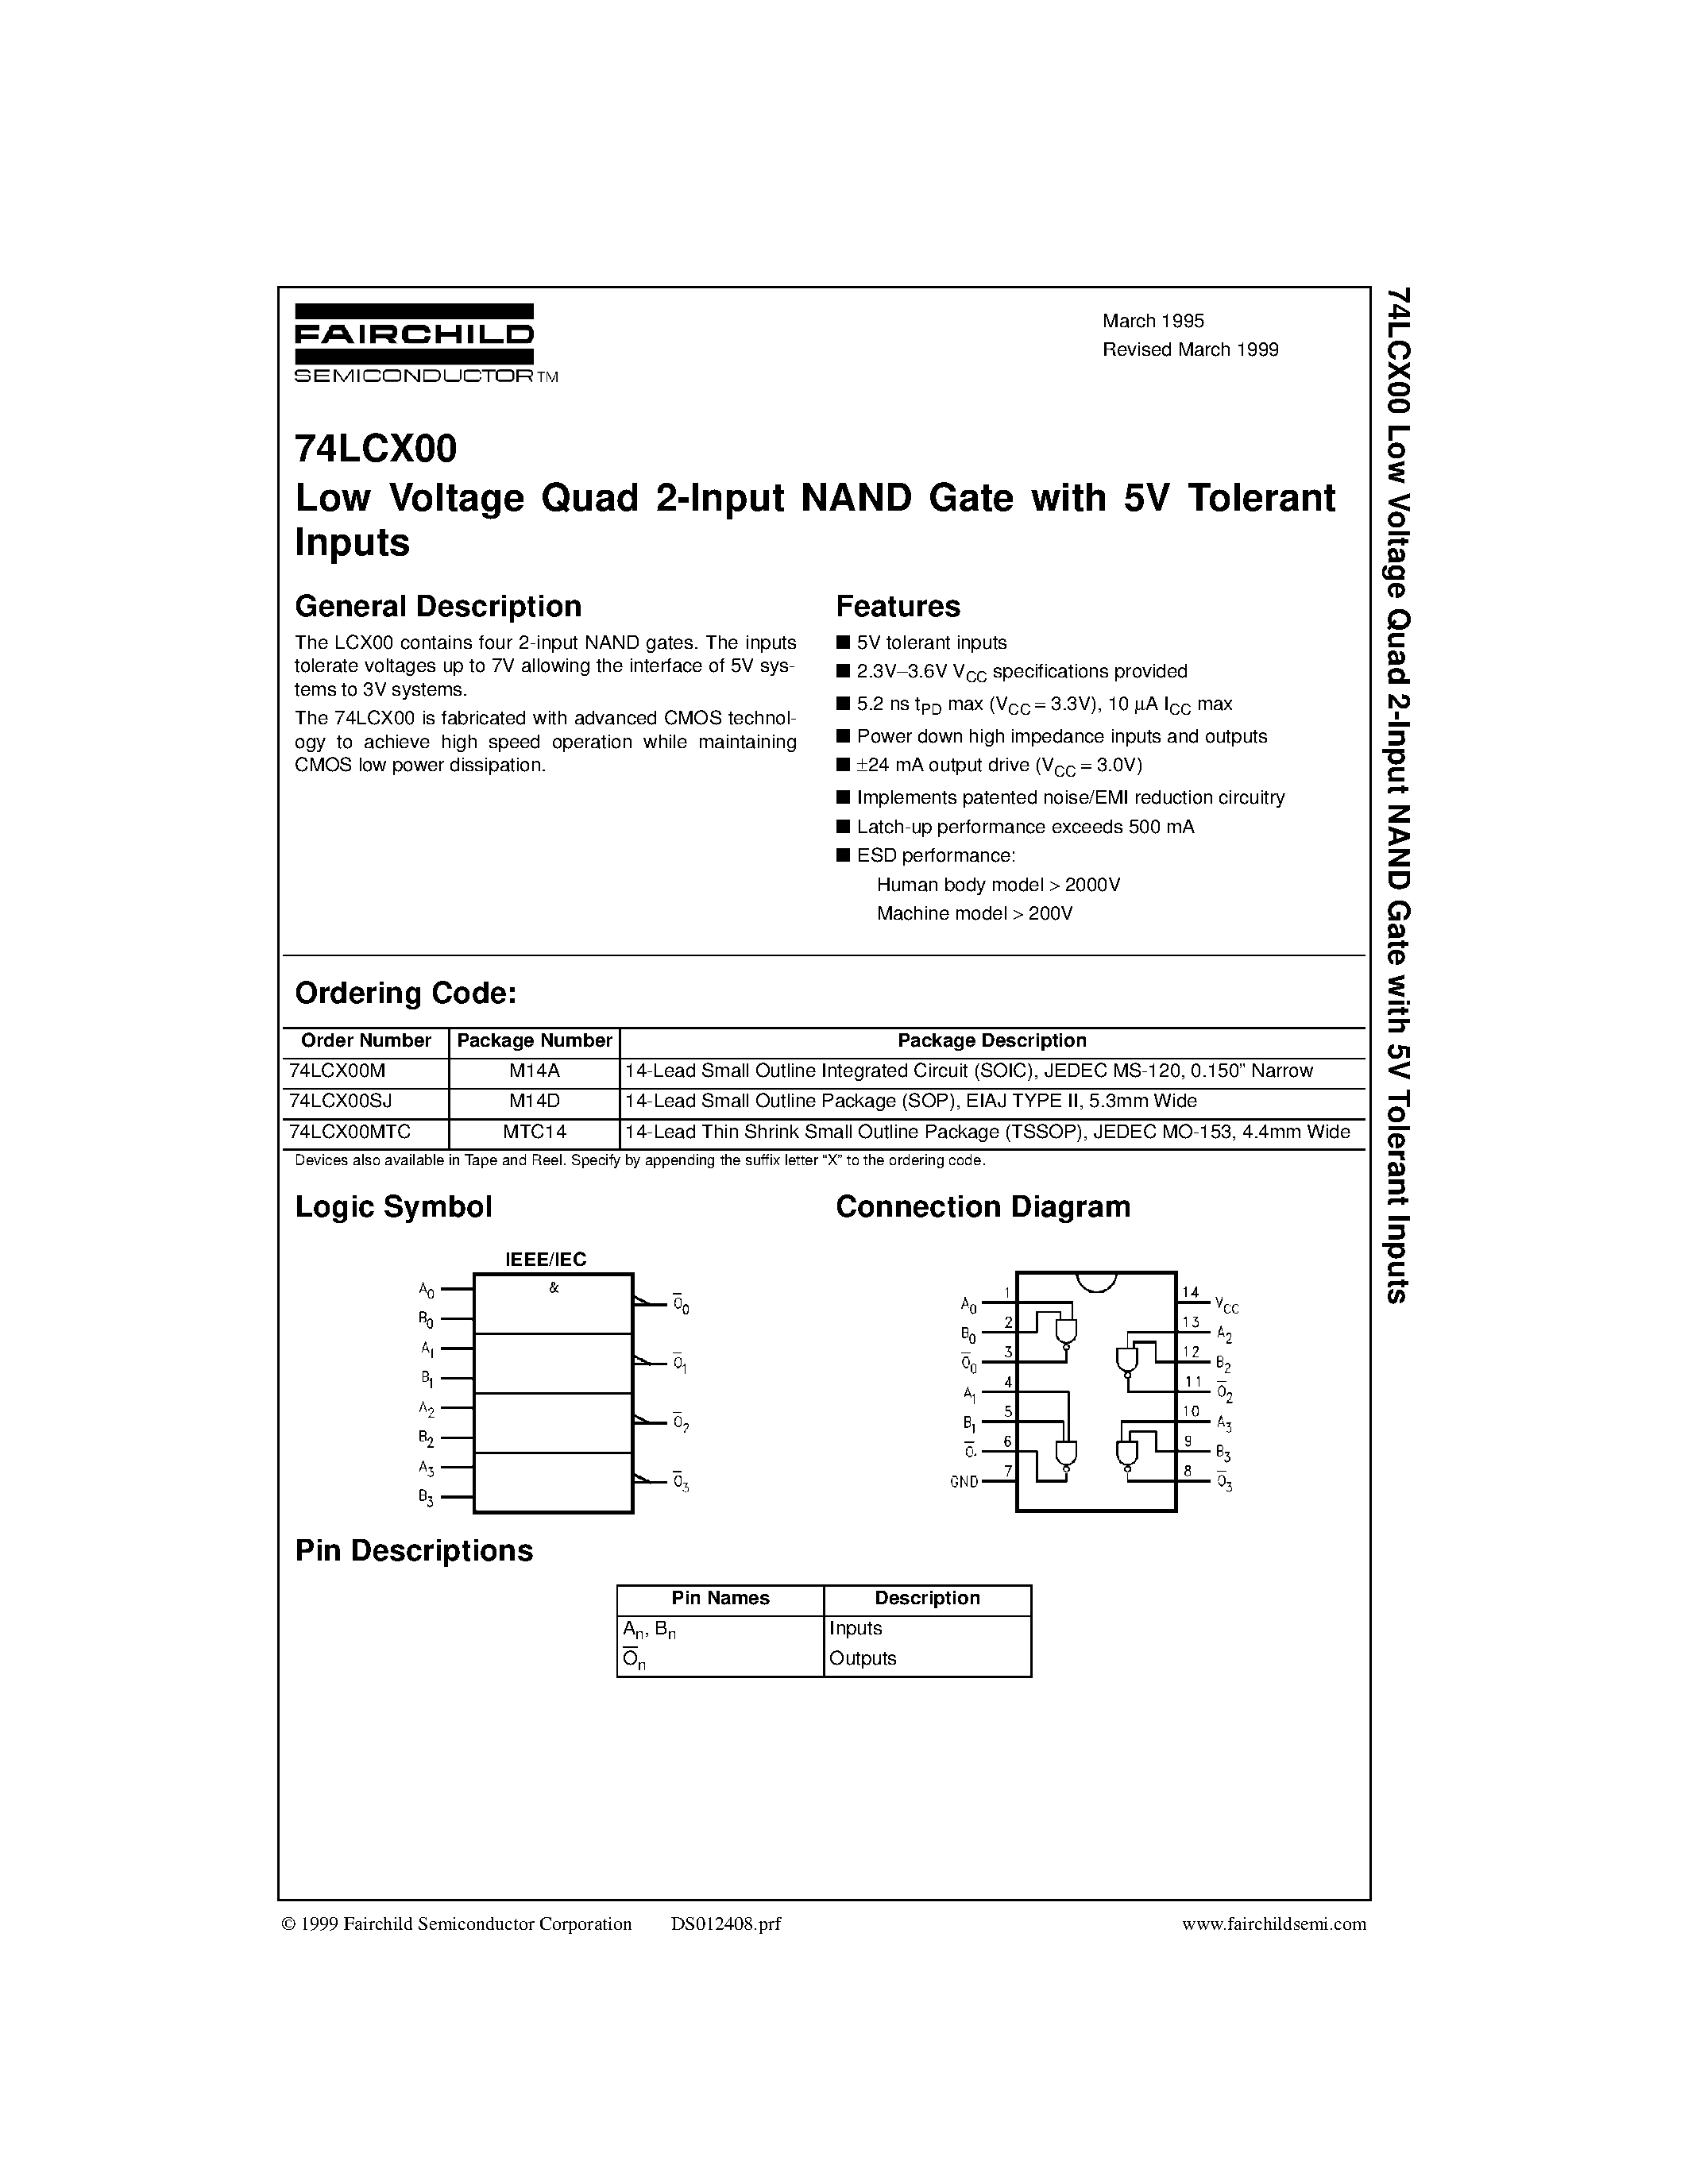 Datasheet 74LCX00 - Low Voltage Quad 2-Input NAND Gate with 5V Tolerant Inputs page 1